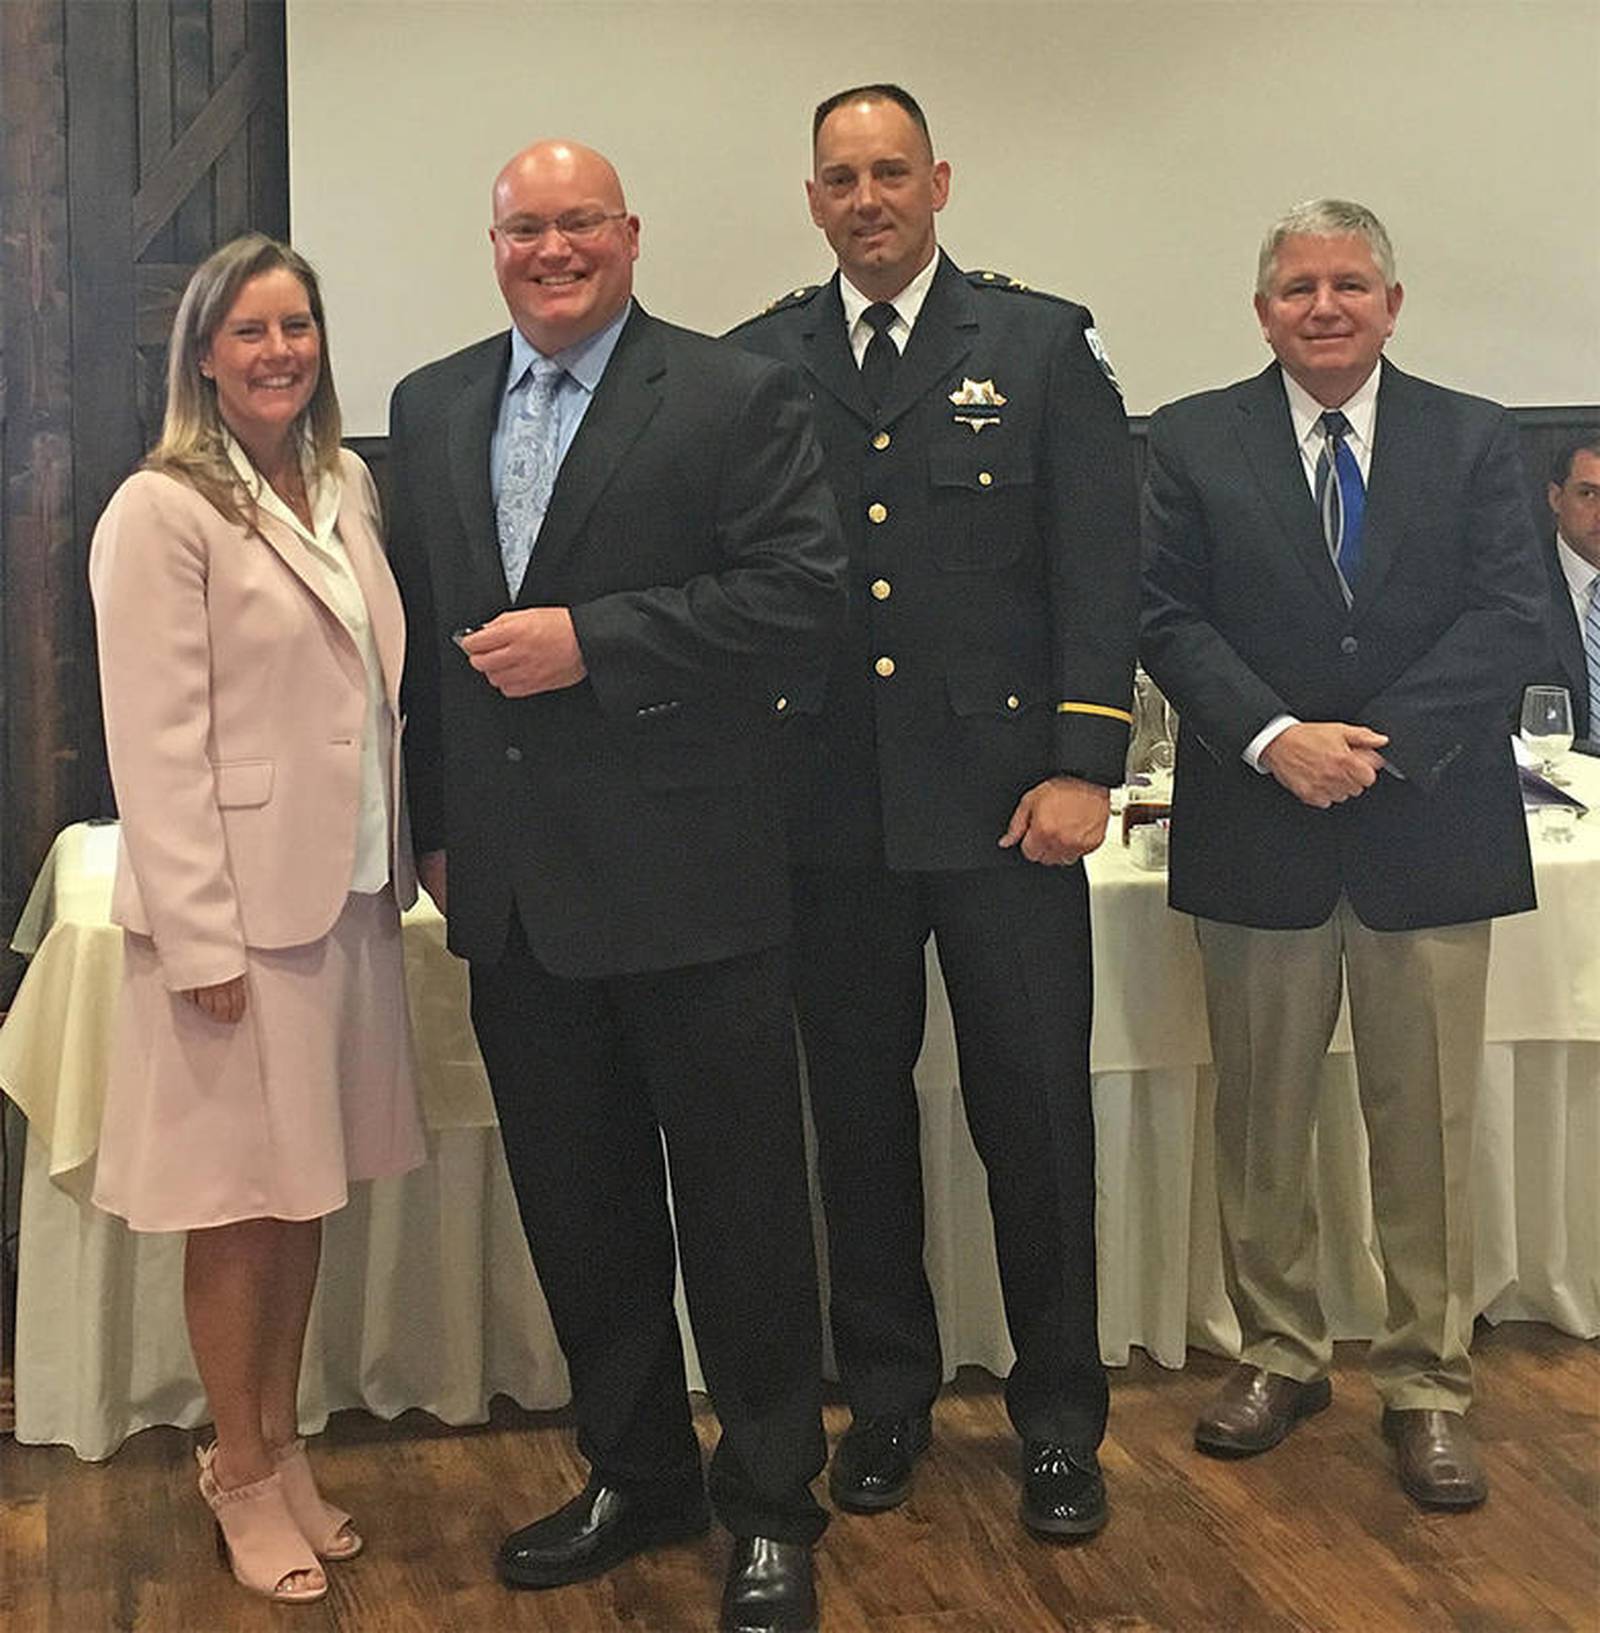 Kendall County Detective Sergeant Graduates From Northwestern University S School Of Police